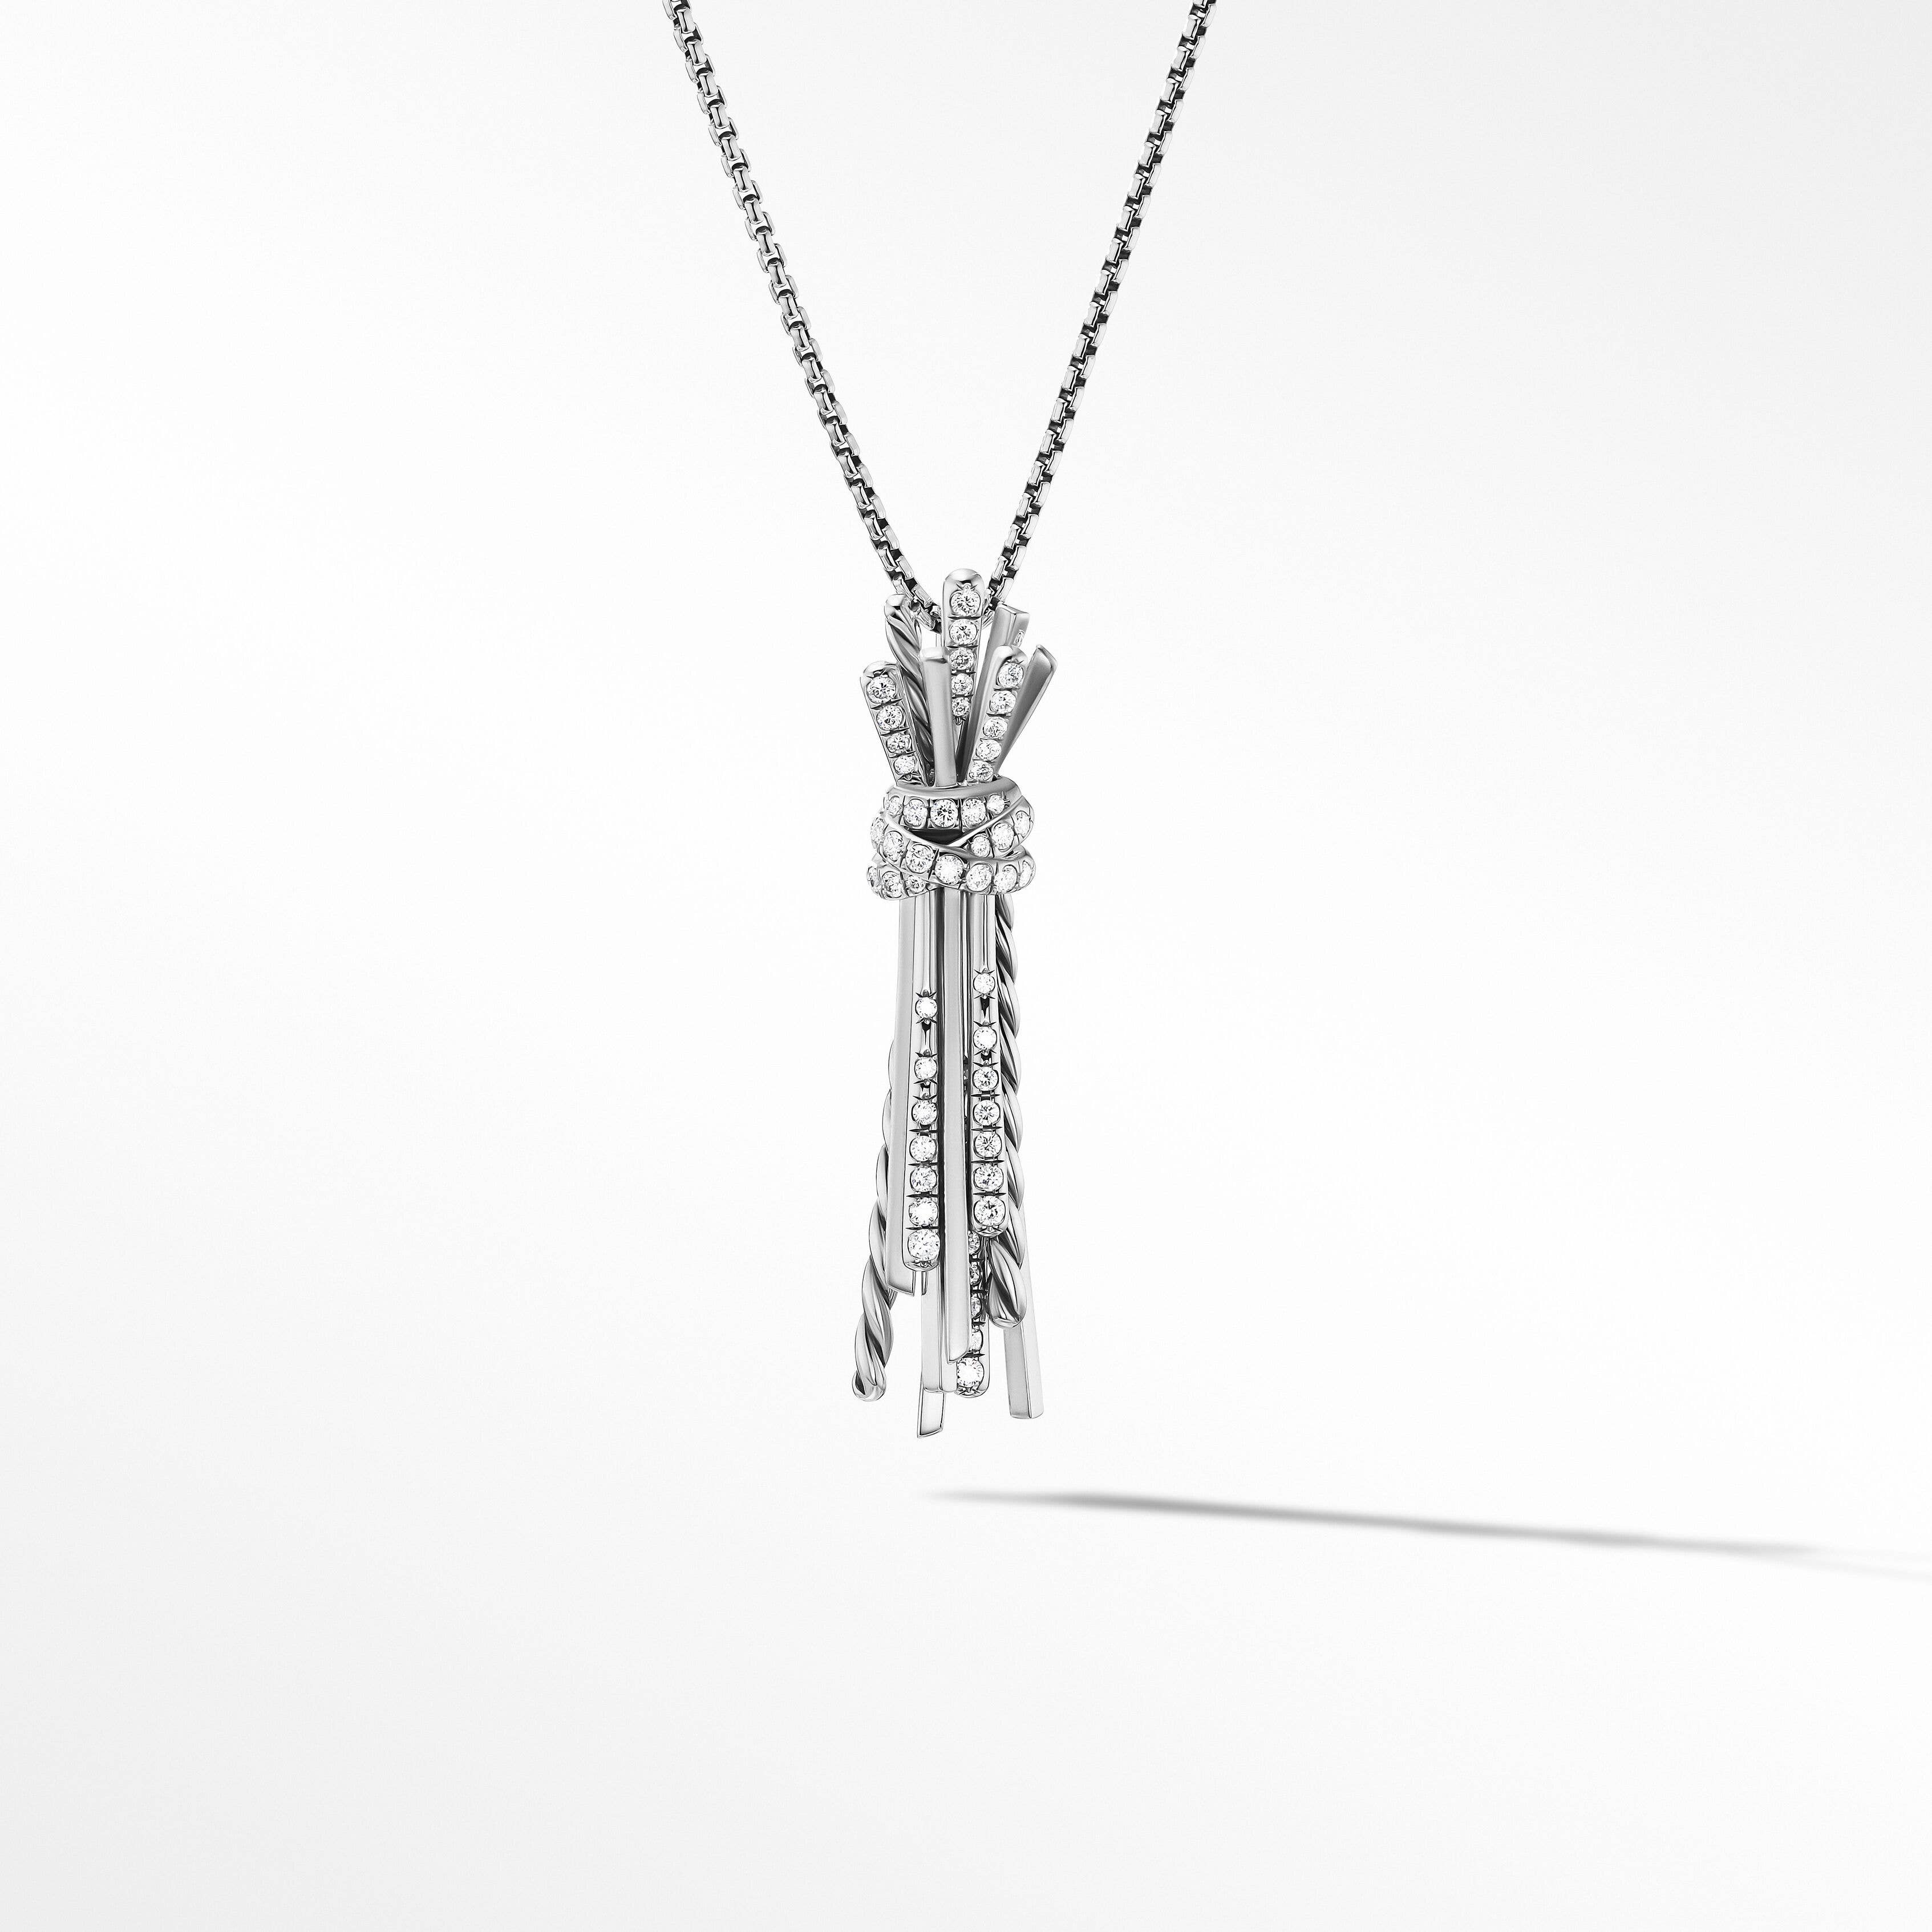 Angelika™ Flair Pendant Necklace in Sterling Silver with Pavé Diamonds